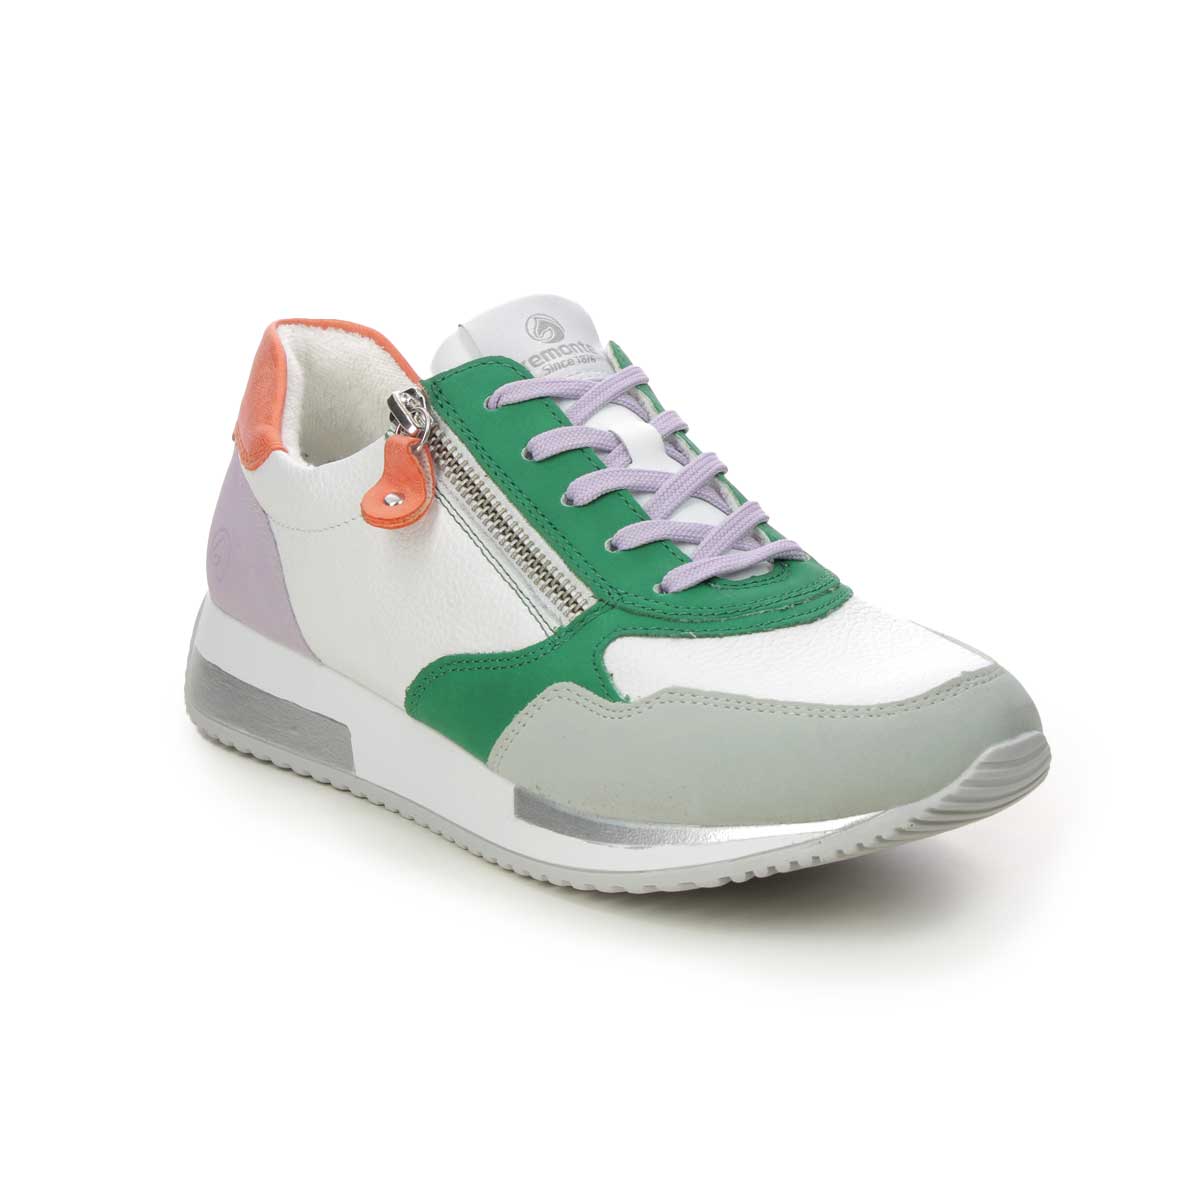 Remonte D0H01-83 Vapod Zip White multi Womens trainers in a Plain Leather and Man-made in Size 41